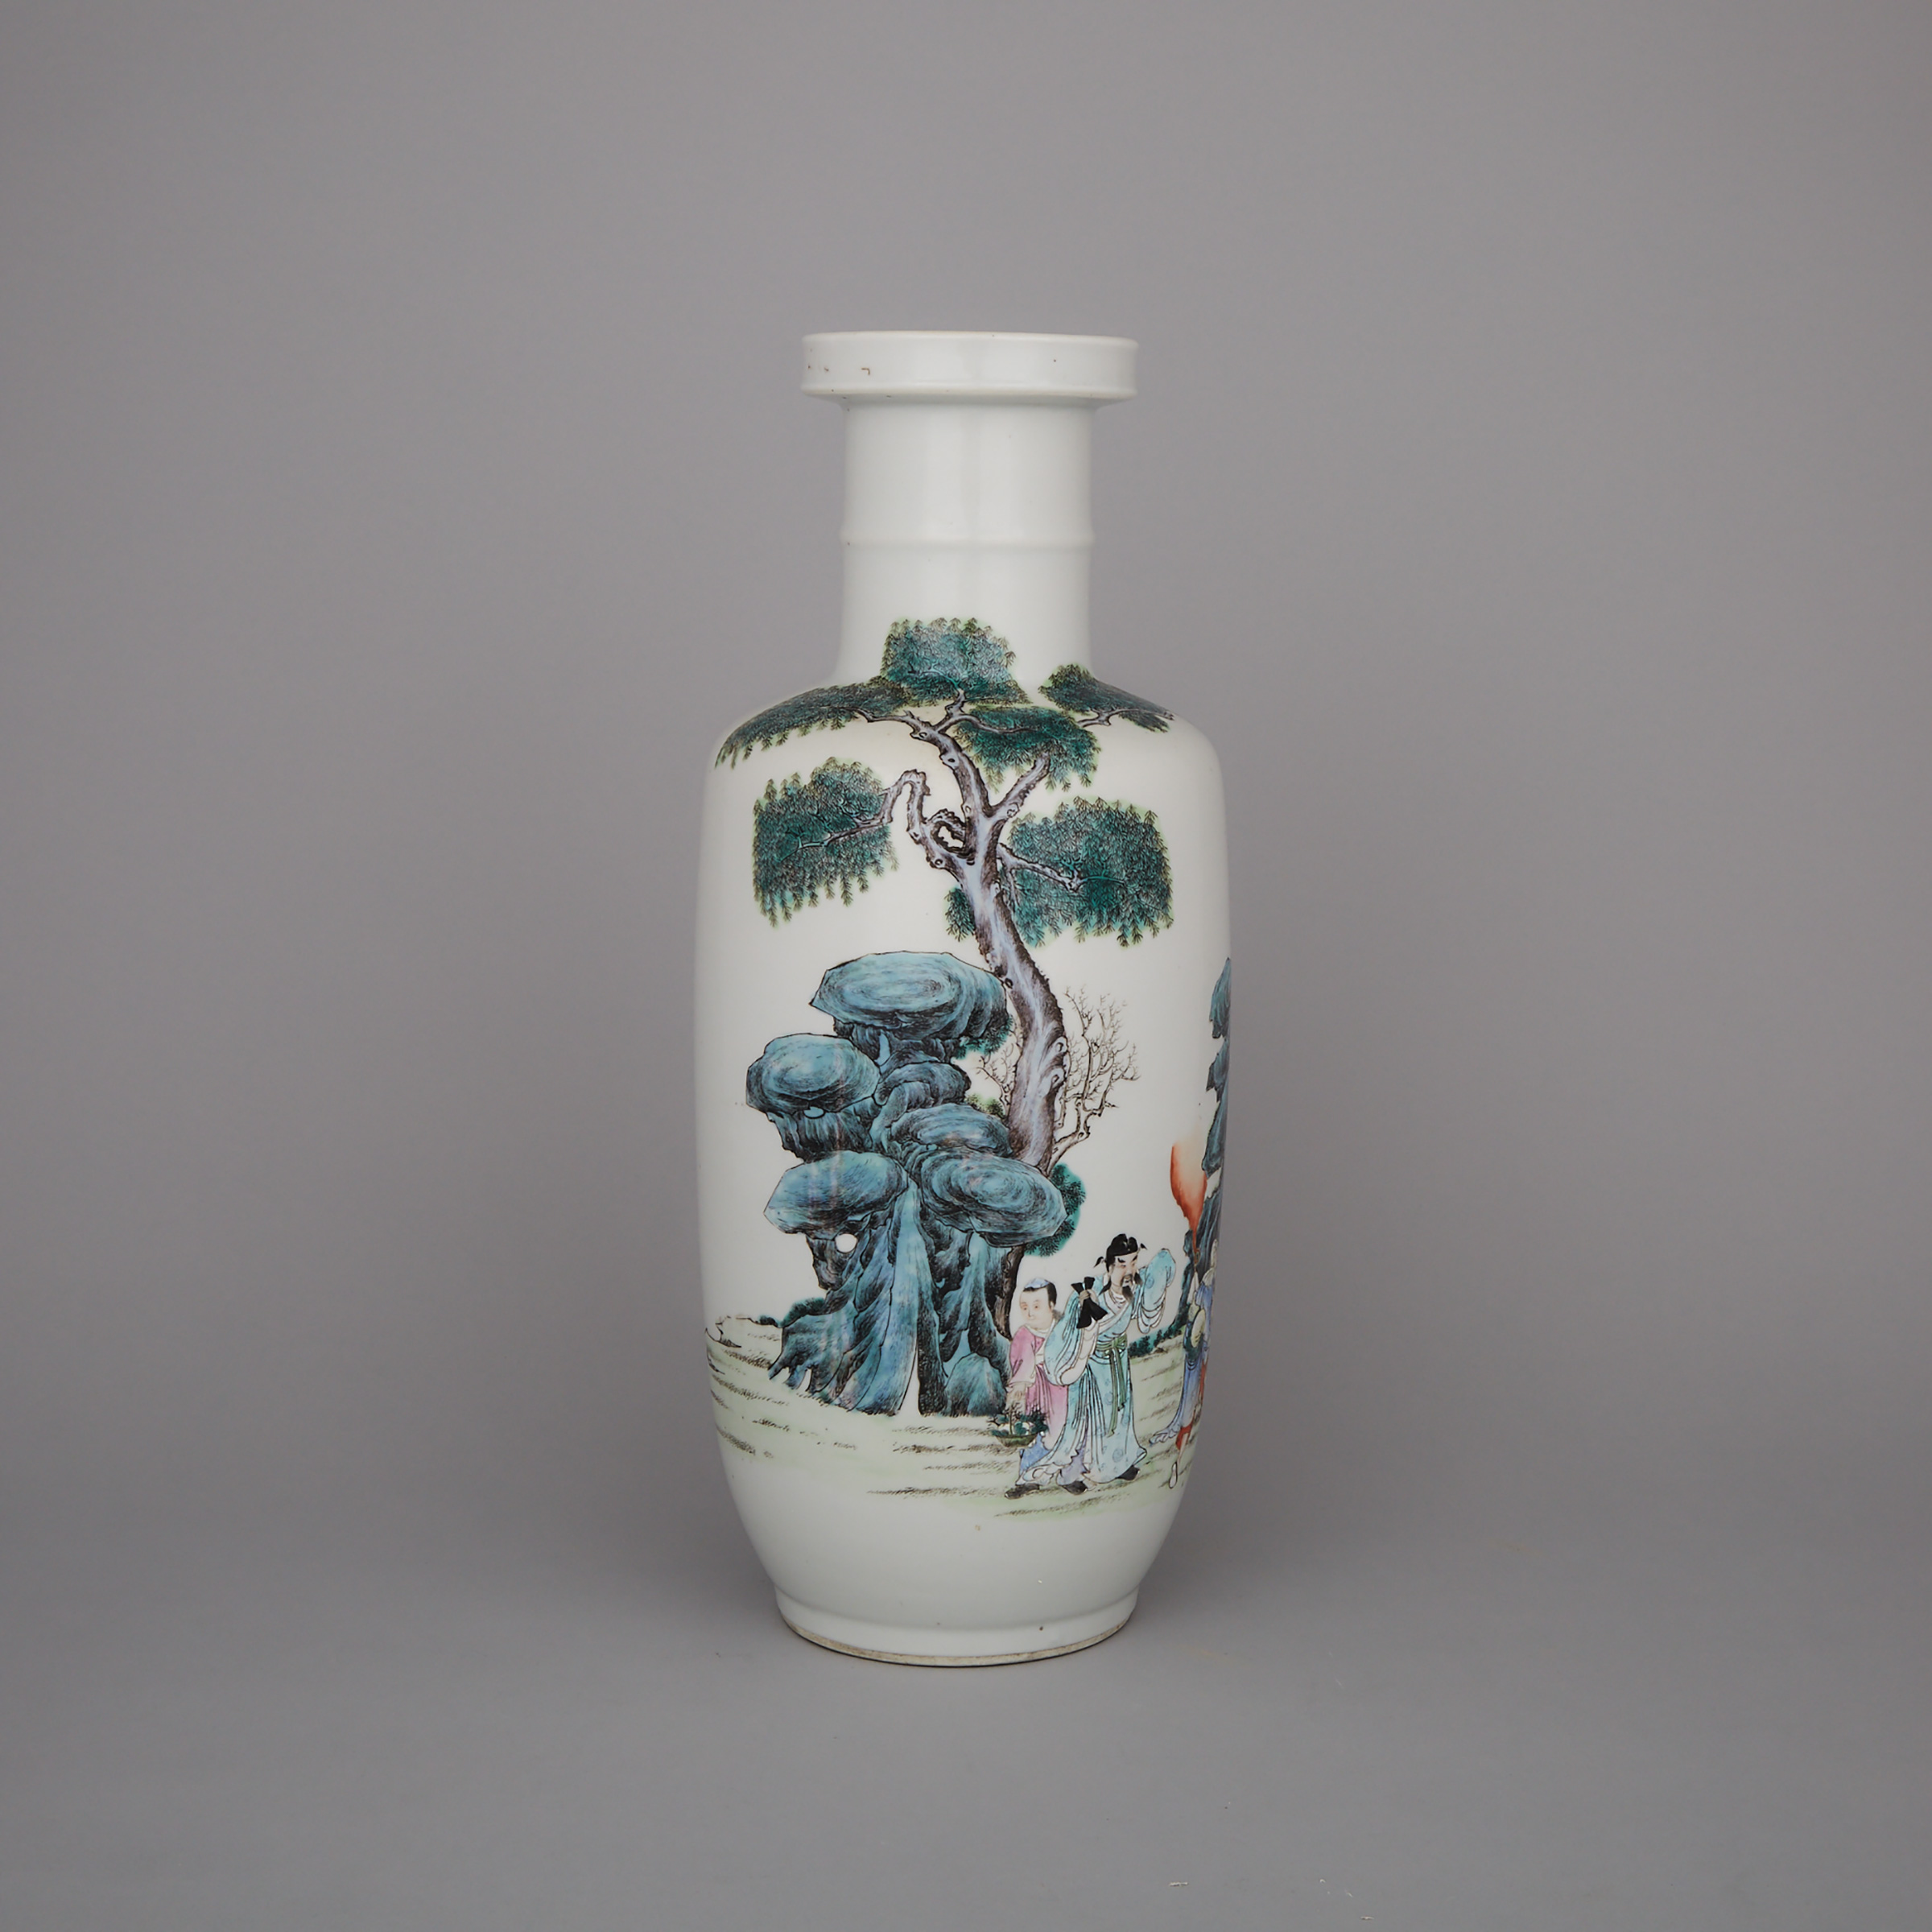 An ‘Eight Immortals’ Rouleau Vase, Late 19th/Early 20th Century